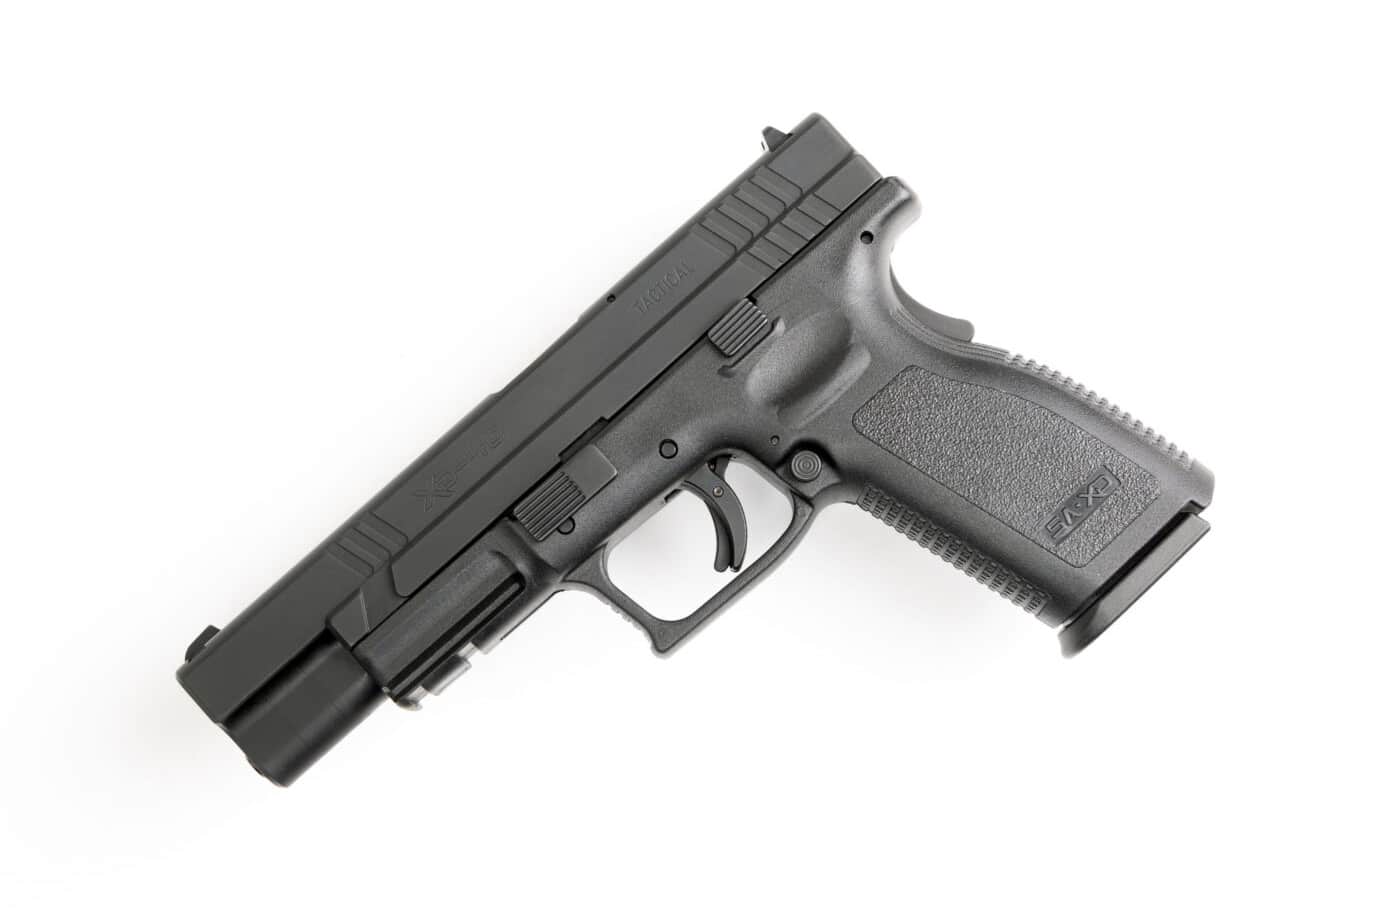 Springfield Armory XD Tactical pistol chambered in .40 S&W